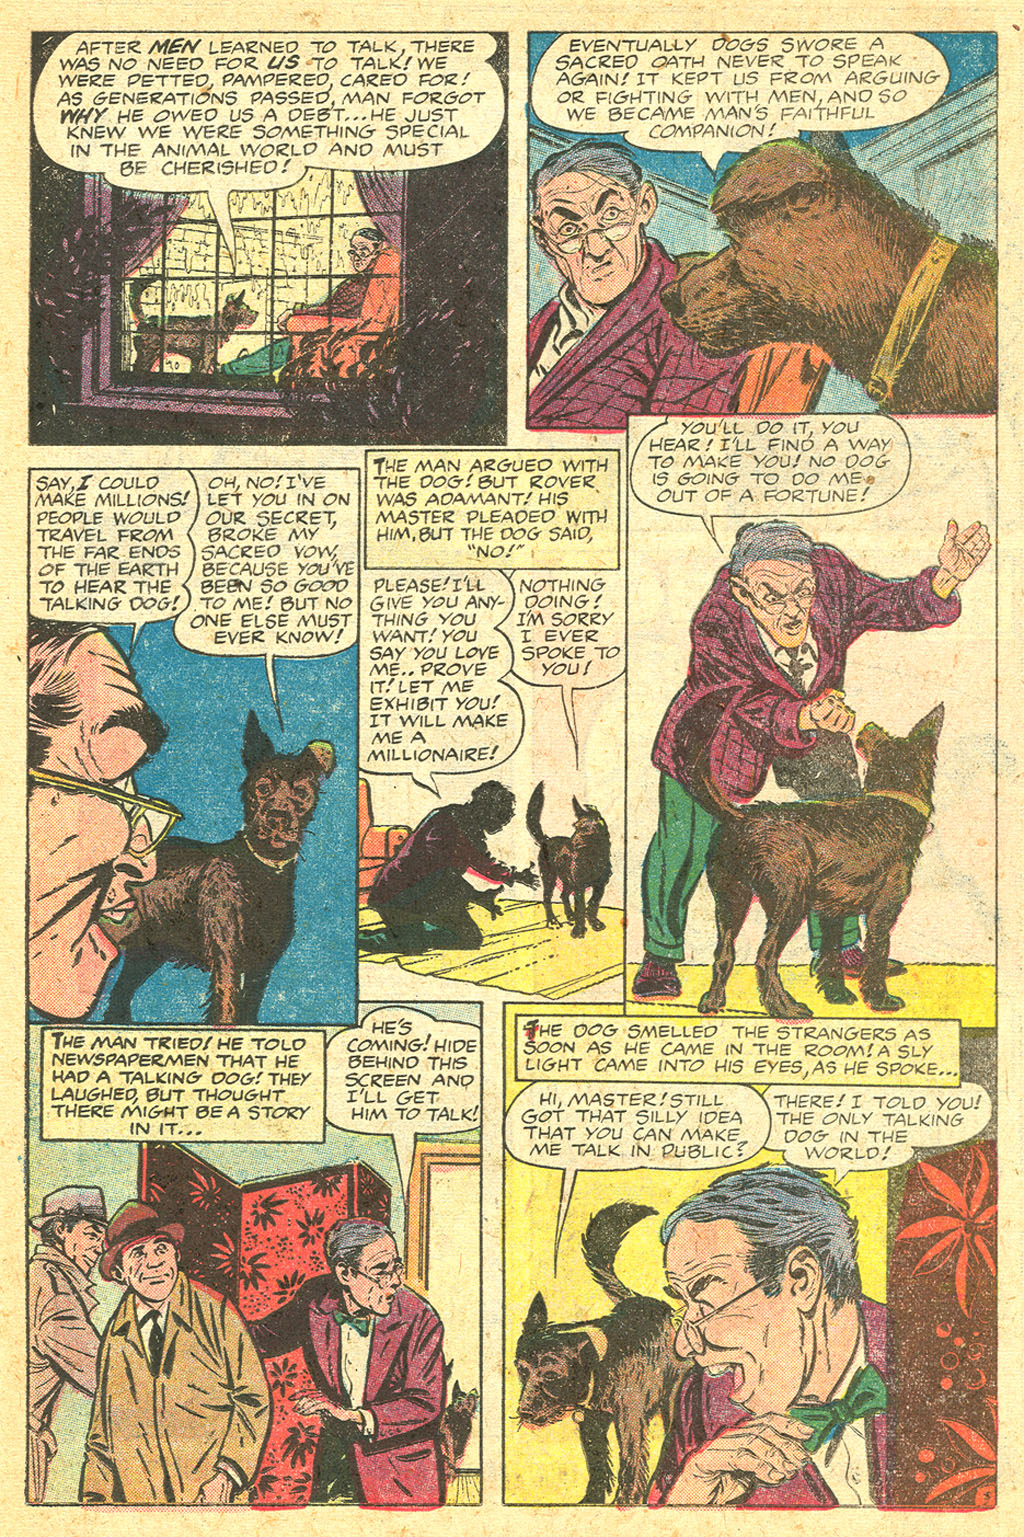 Marvel Tales (1949) 133 Page 22